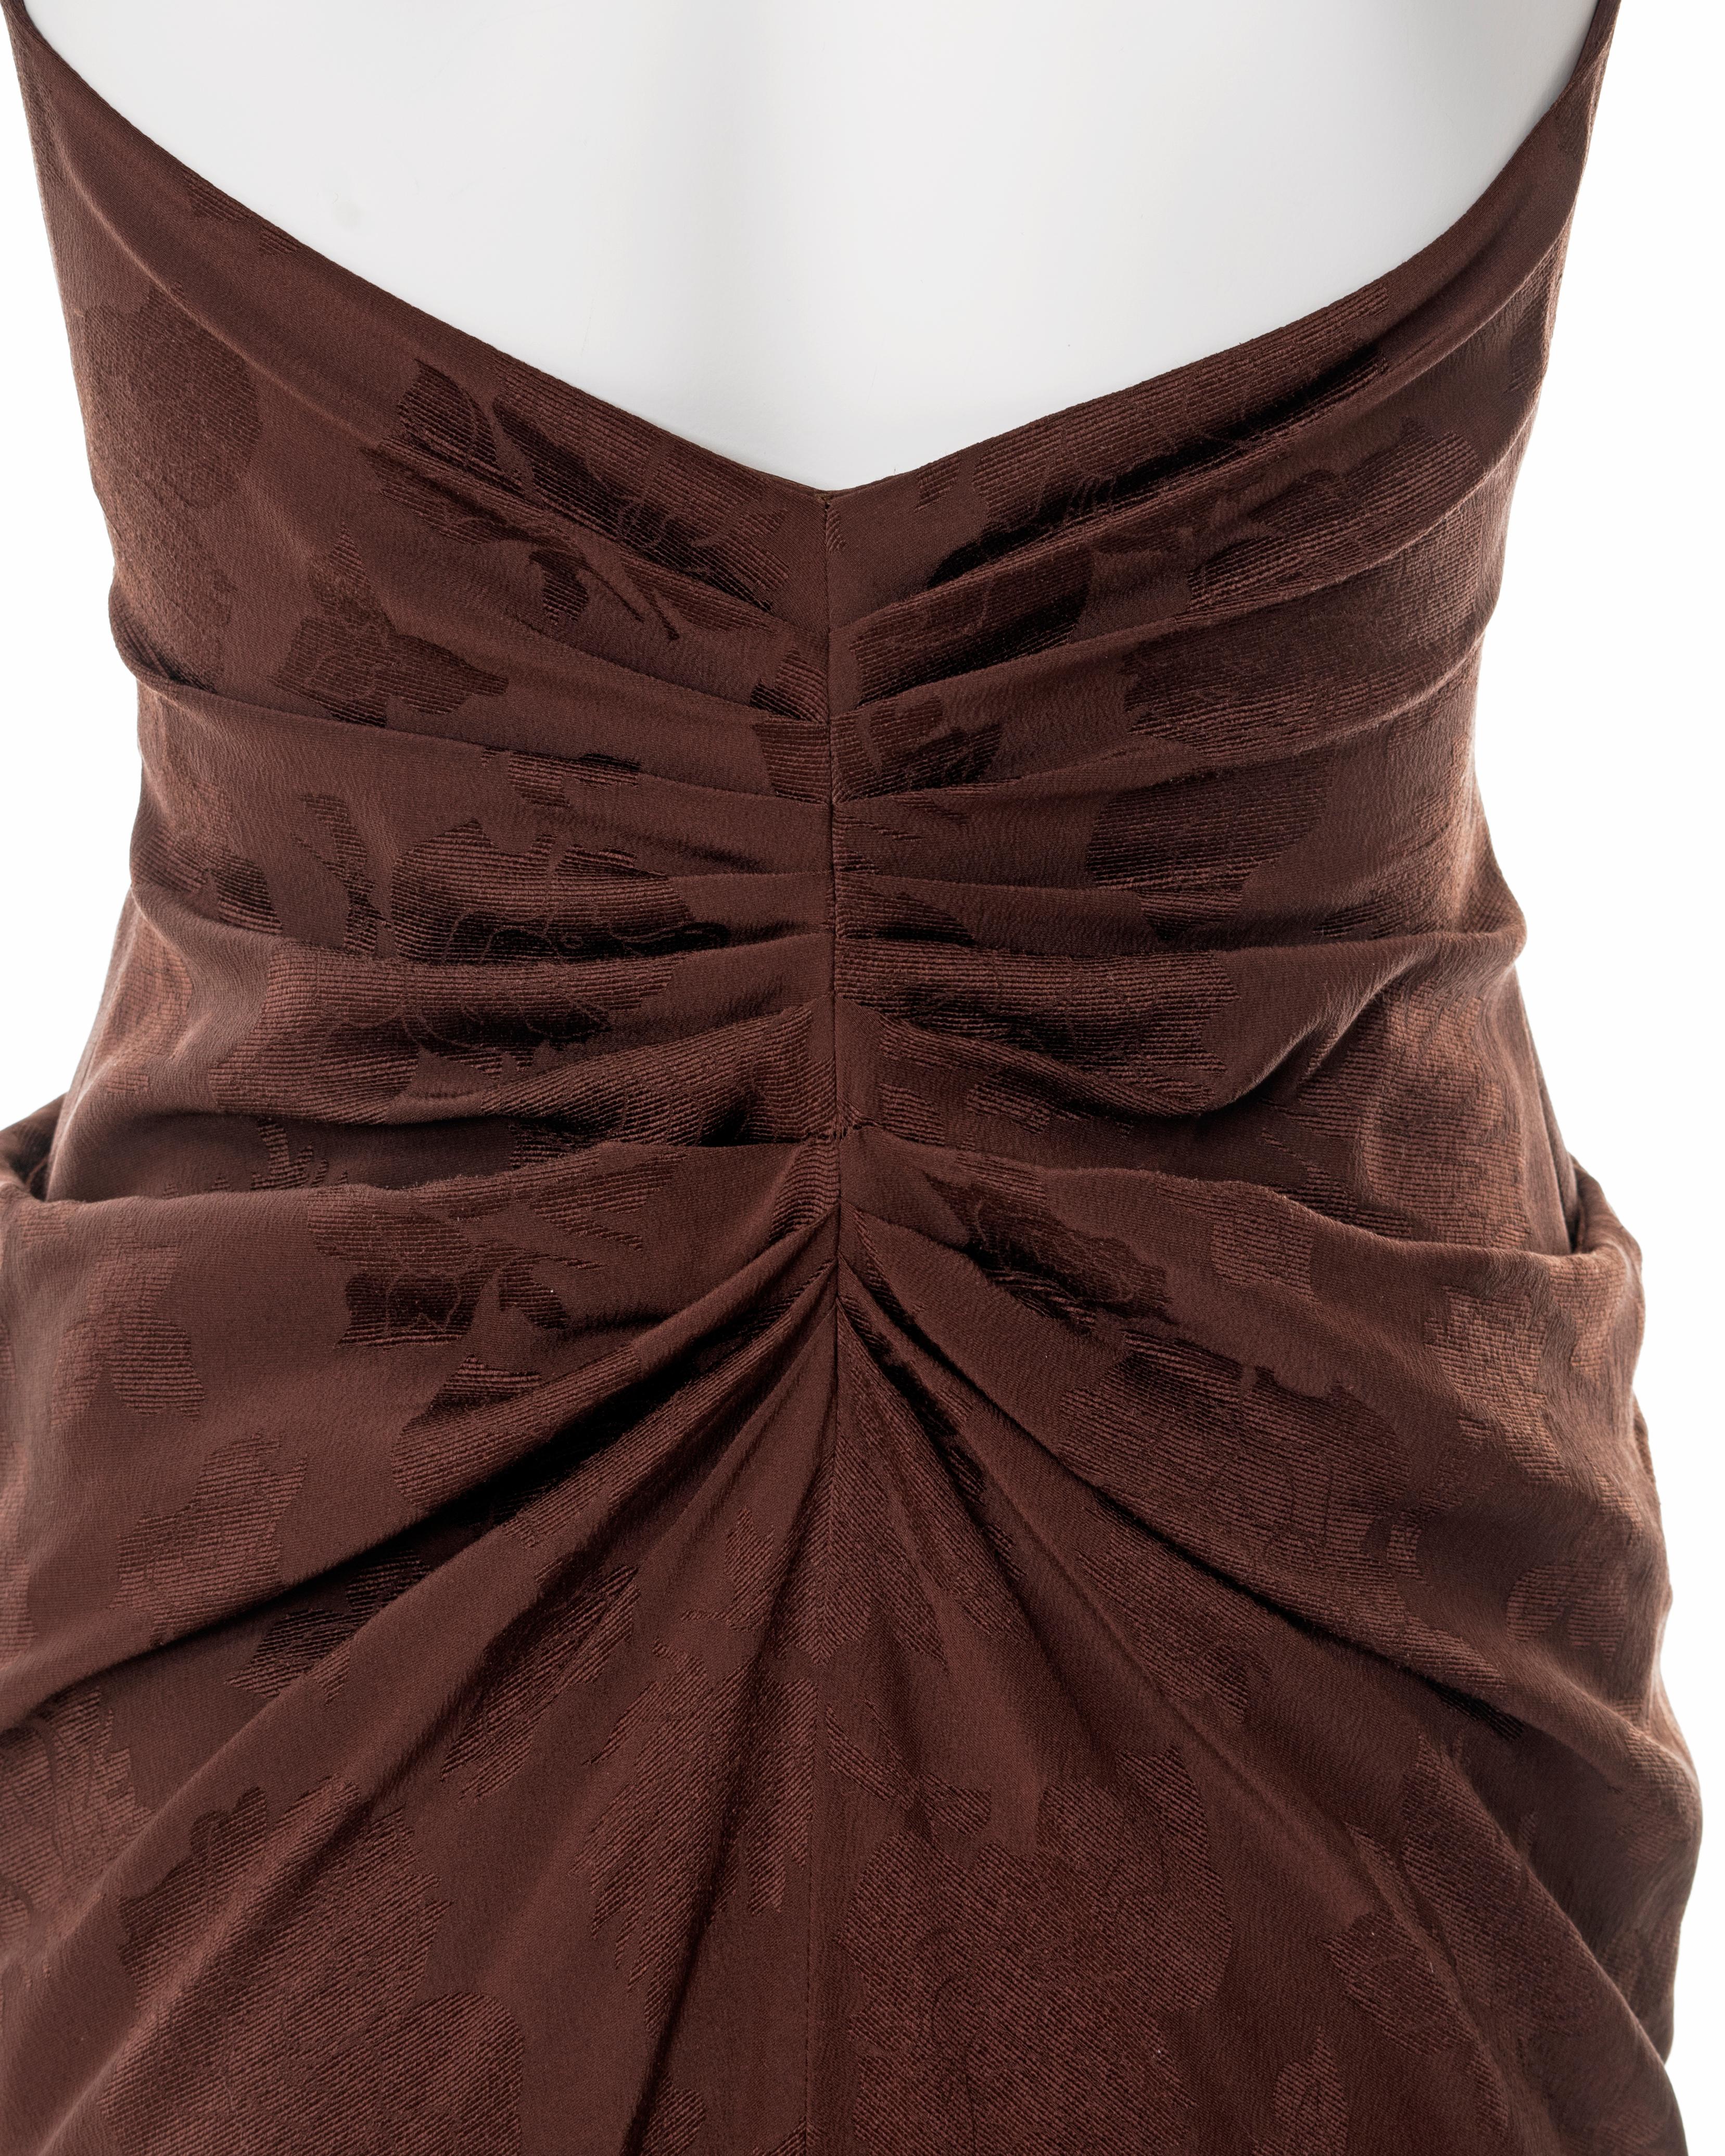 Christian Dior by John Galliano pearl beaded brown silk cocktail dress, ss 2008 For Sale 5